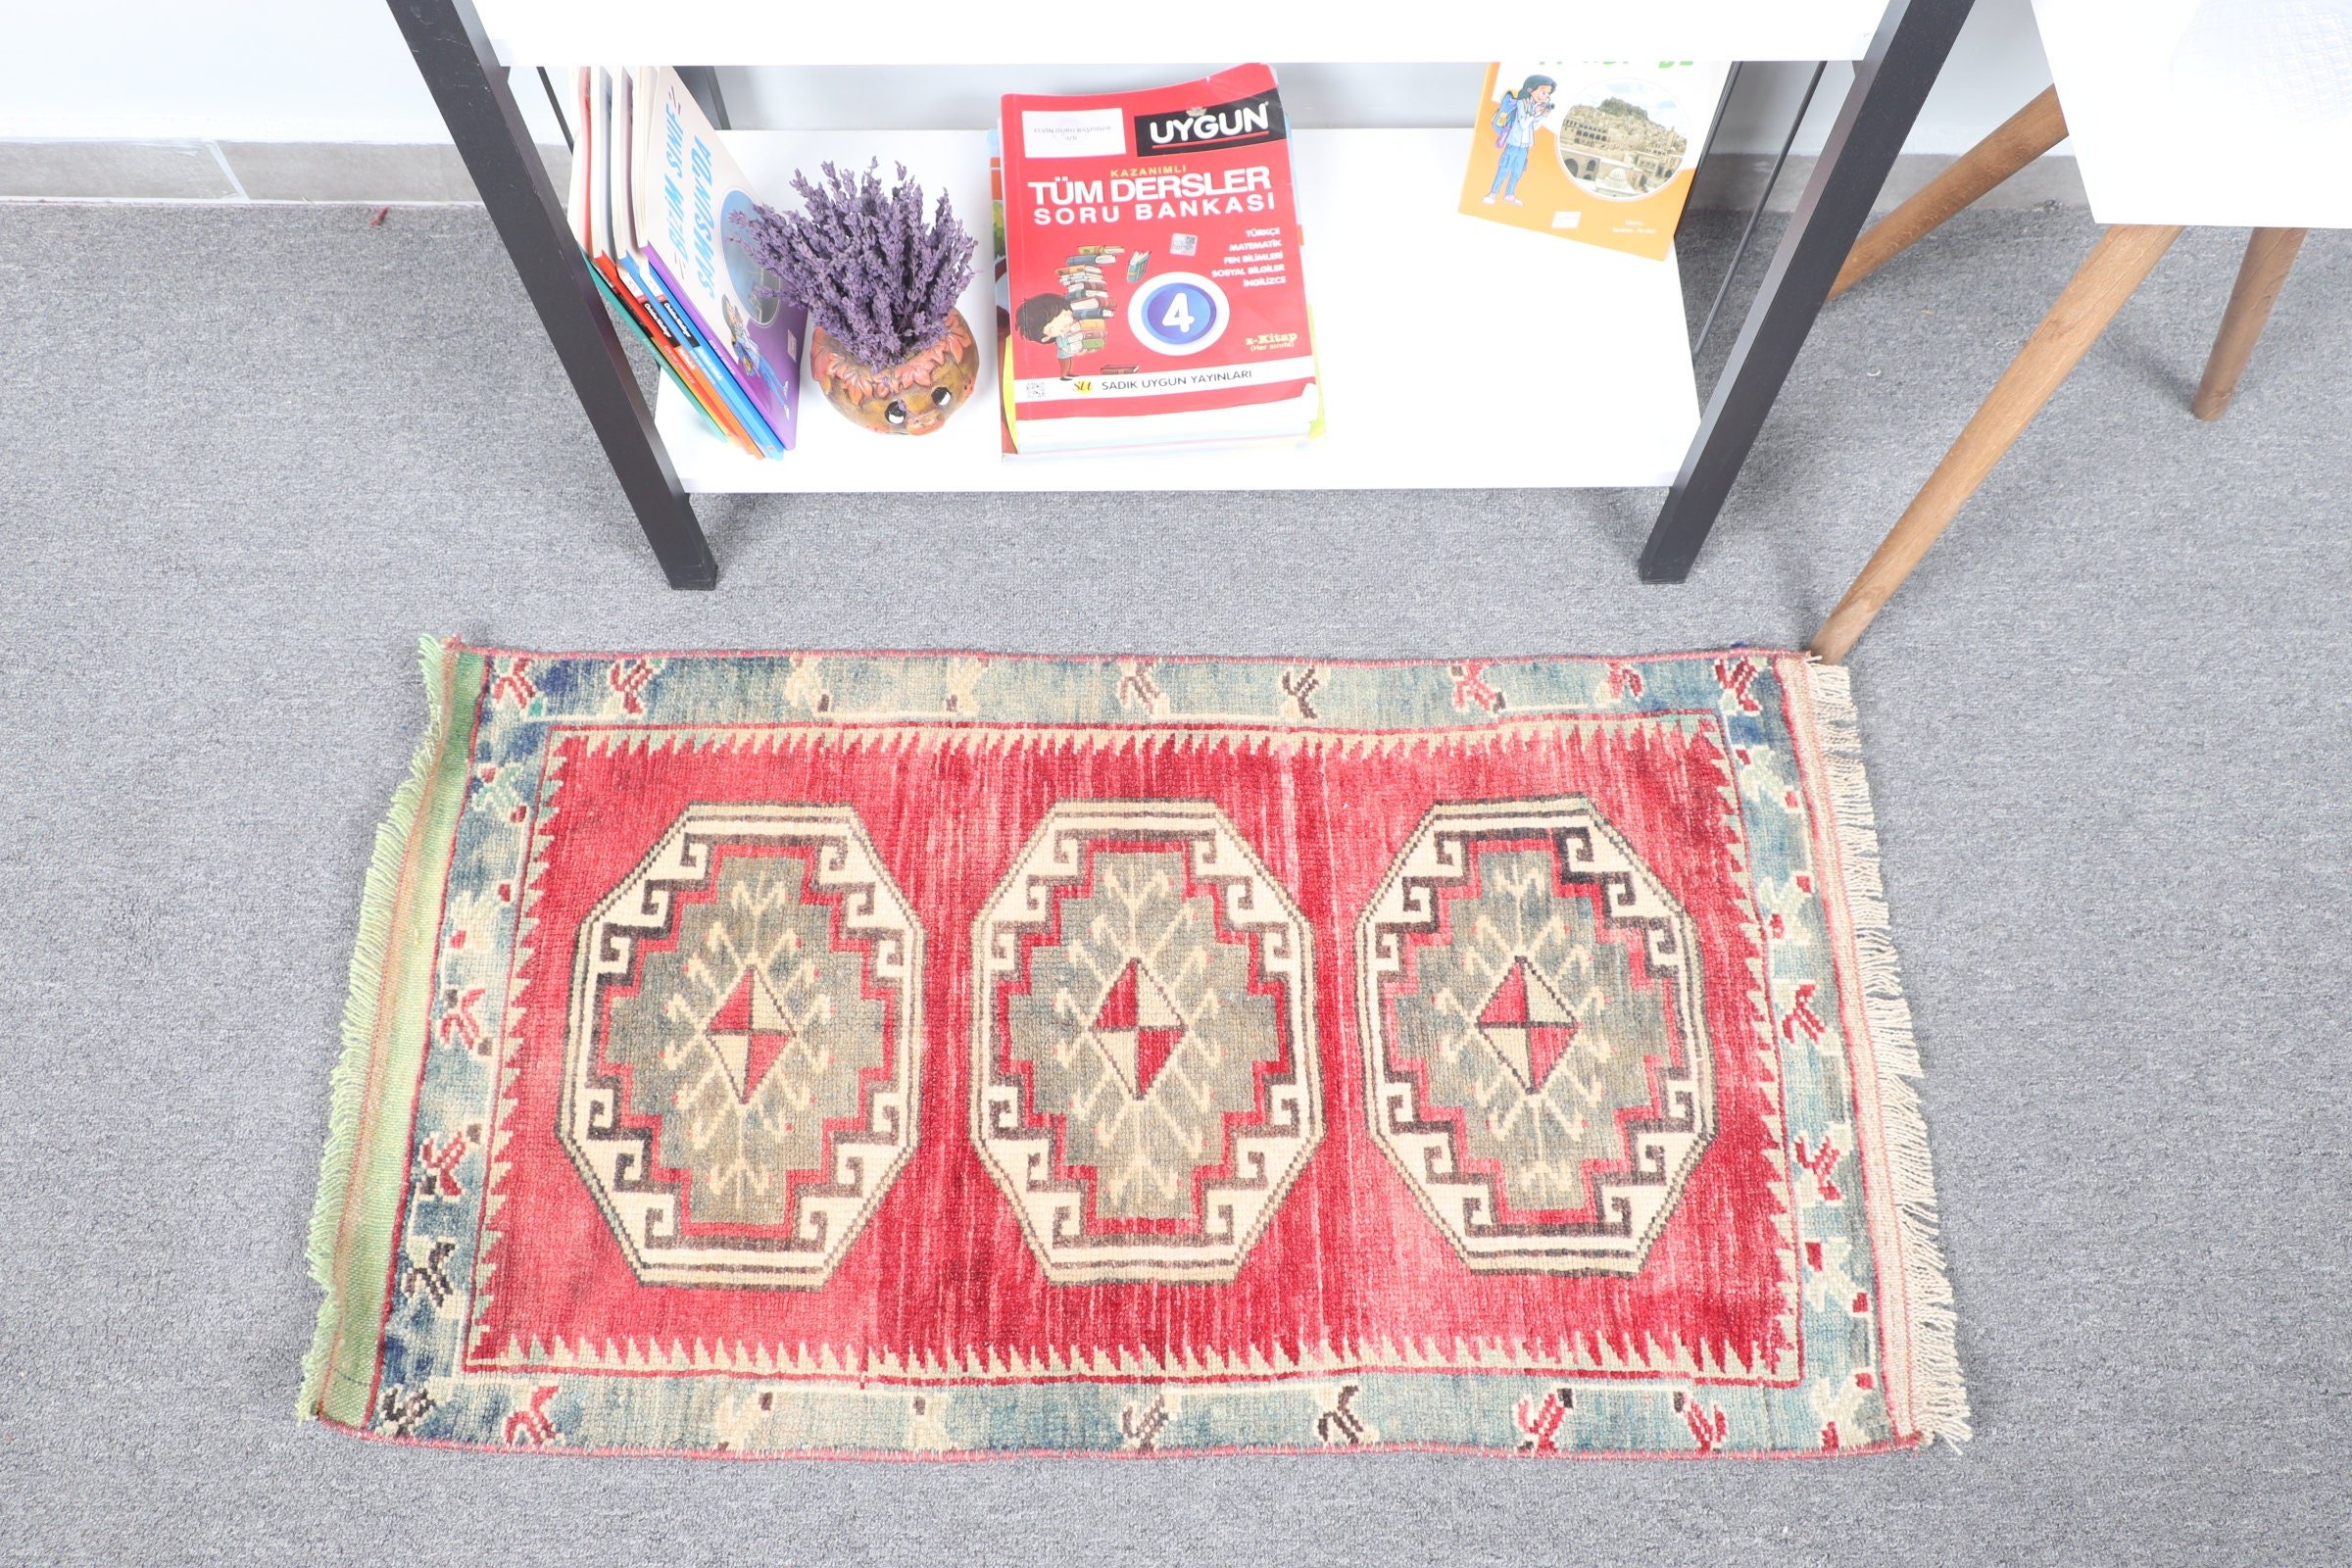 1.7x3.1 ft Small Rugs, Red Home Decor Rug, Rugs for Bath, Kitchen Rug, Turkish Rug, Bedroom Rug, Car Mat Rug, Vintage Rugs